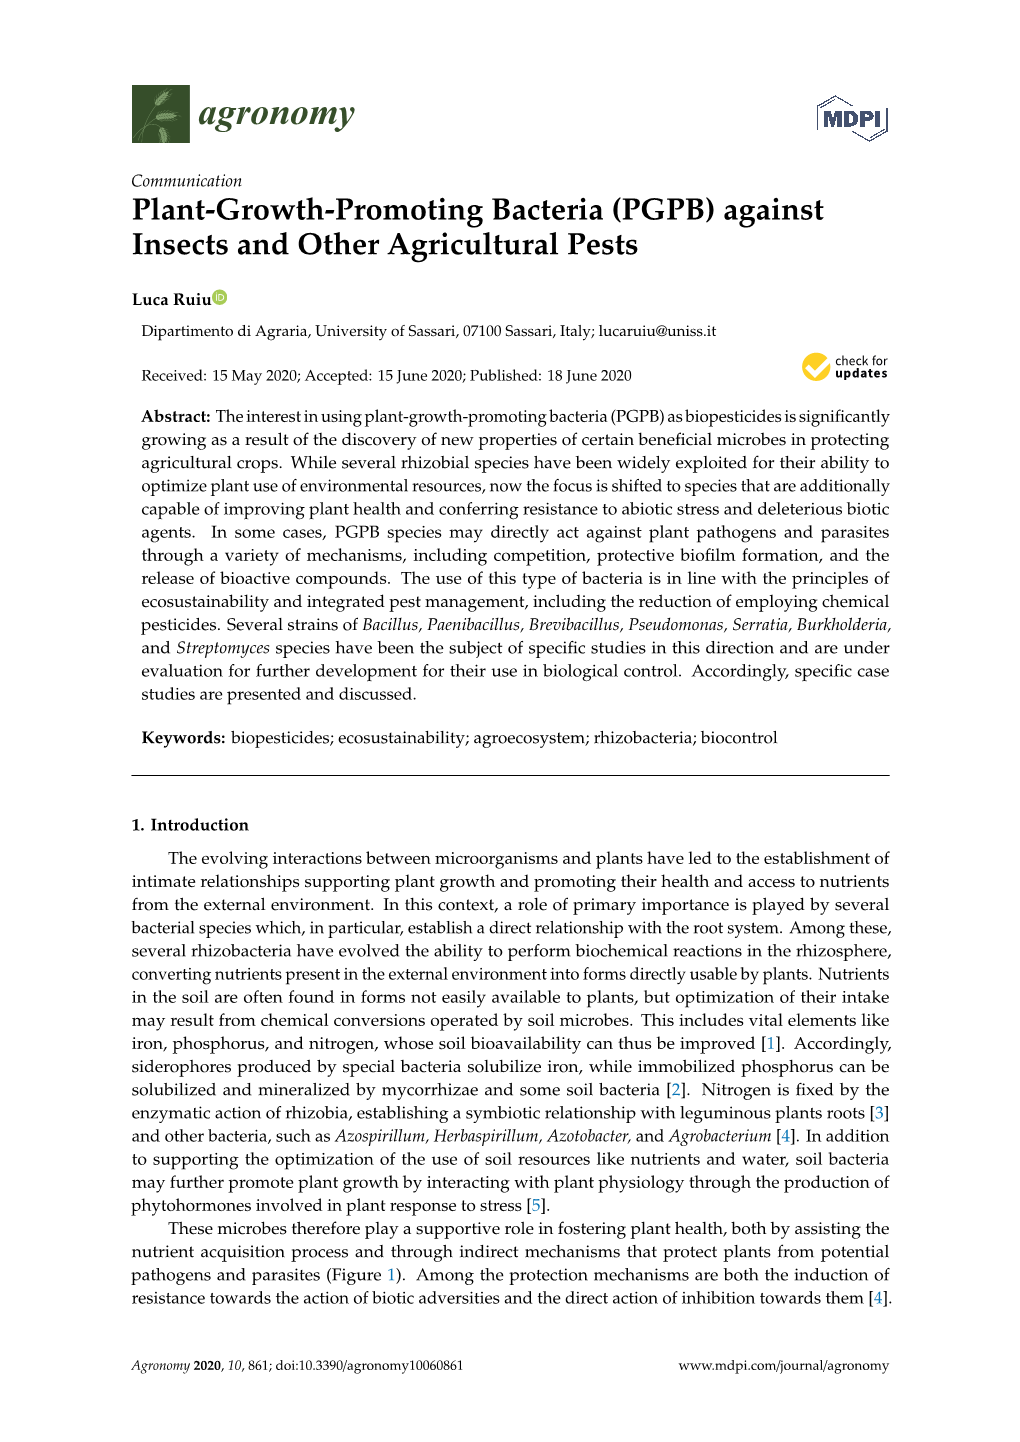 Plant-Growth-Promoting Bacteria (PGPB) Against Insects and Other Agricultural Pests